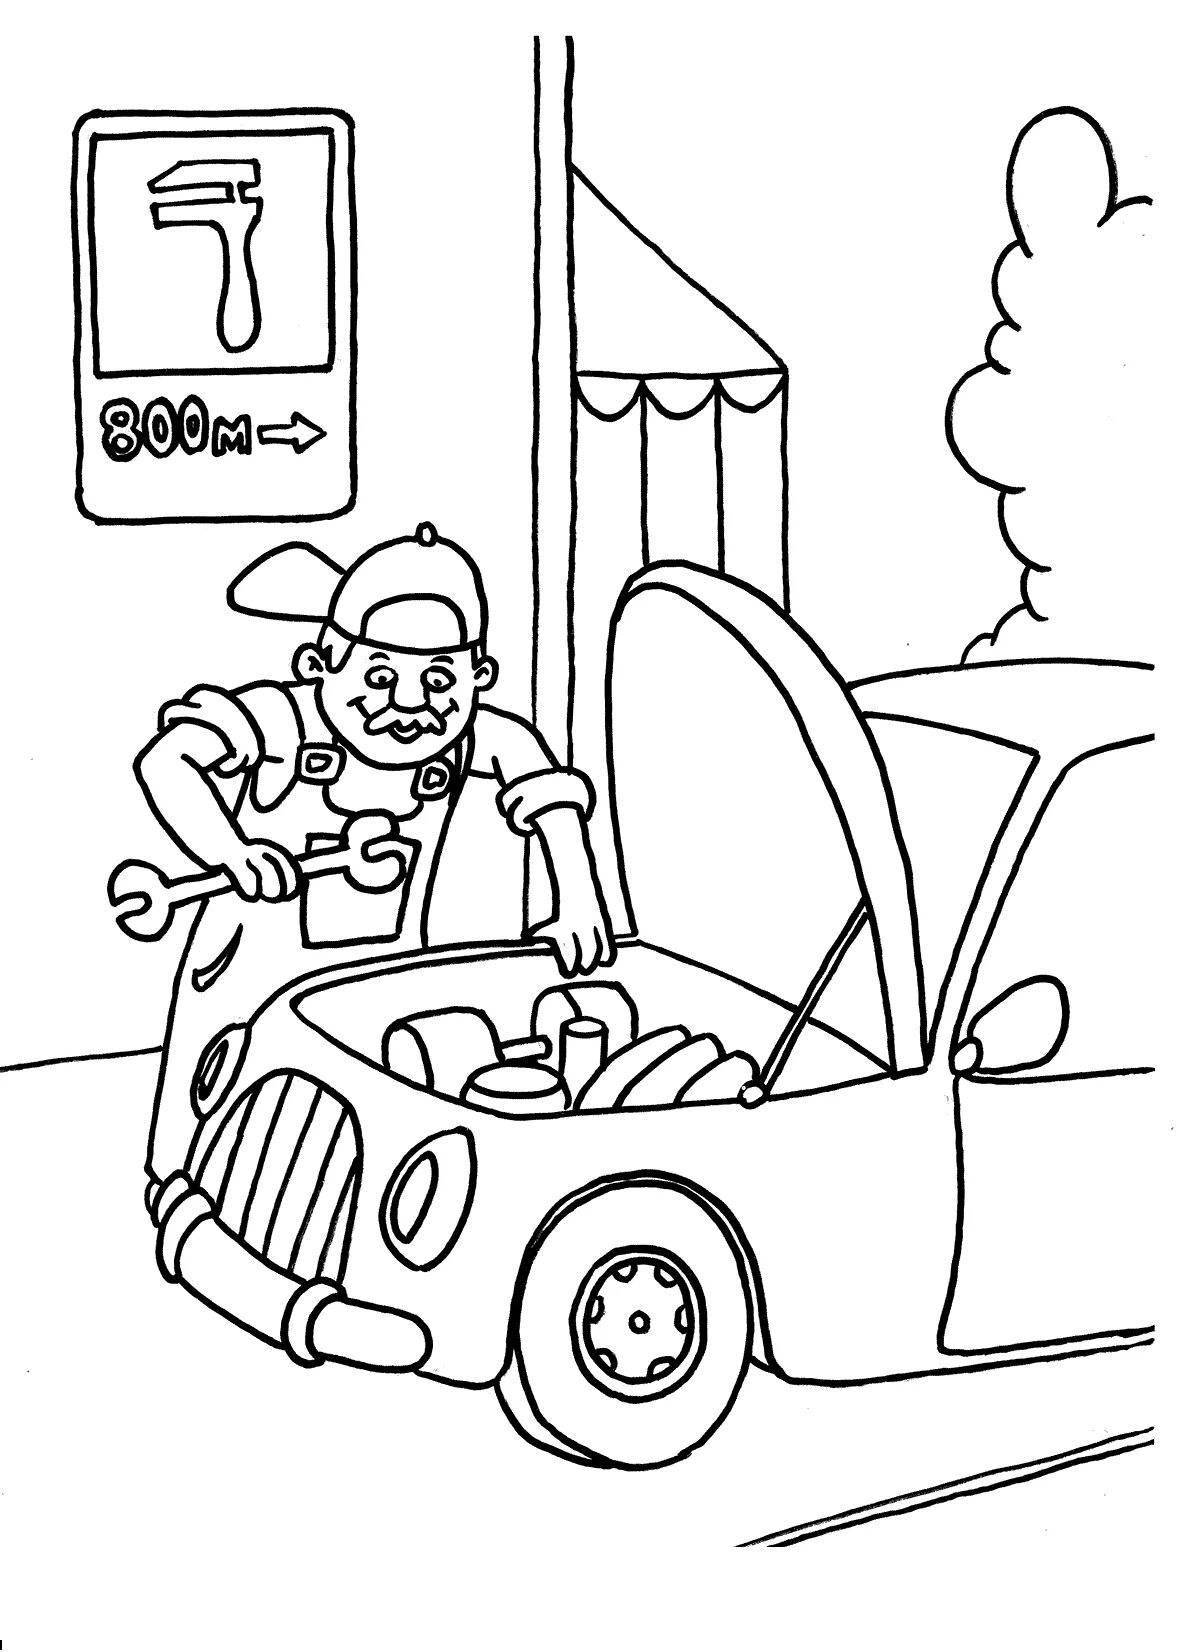 Shining driver coloring page